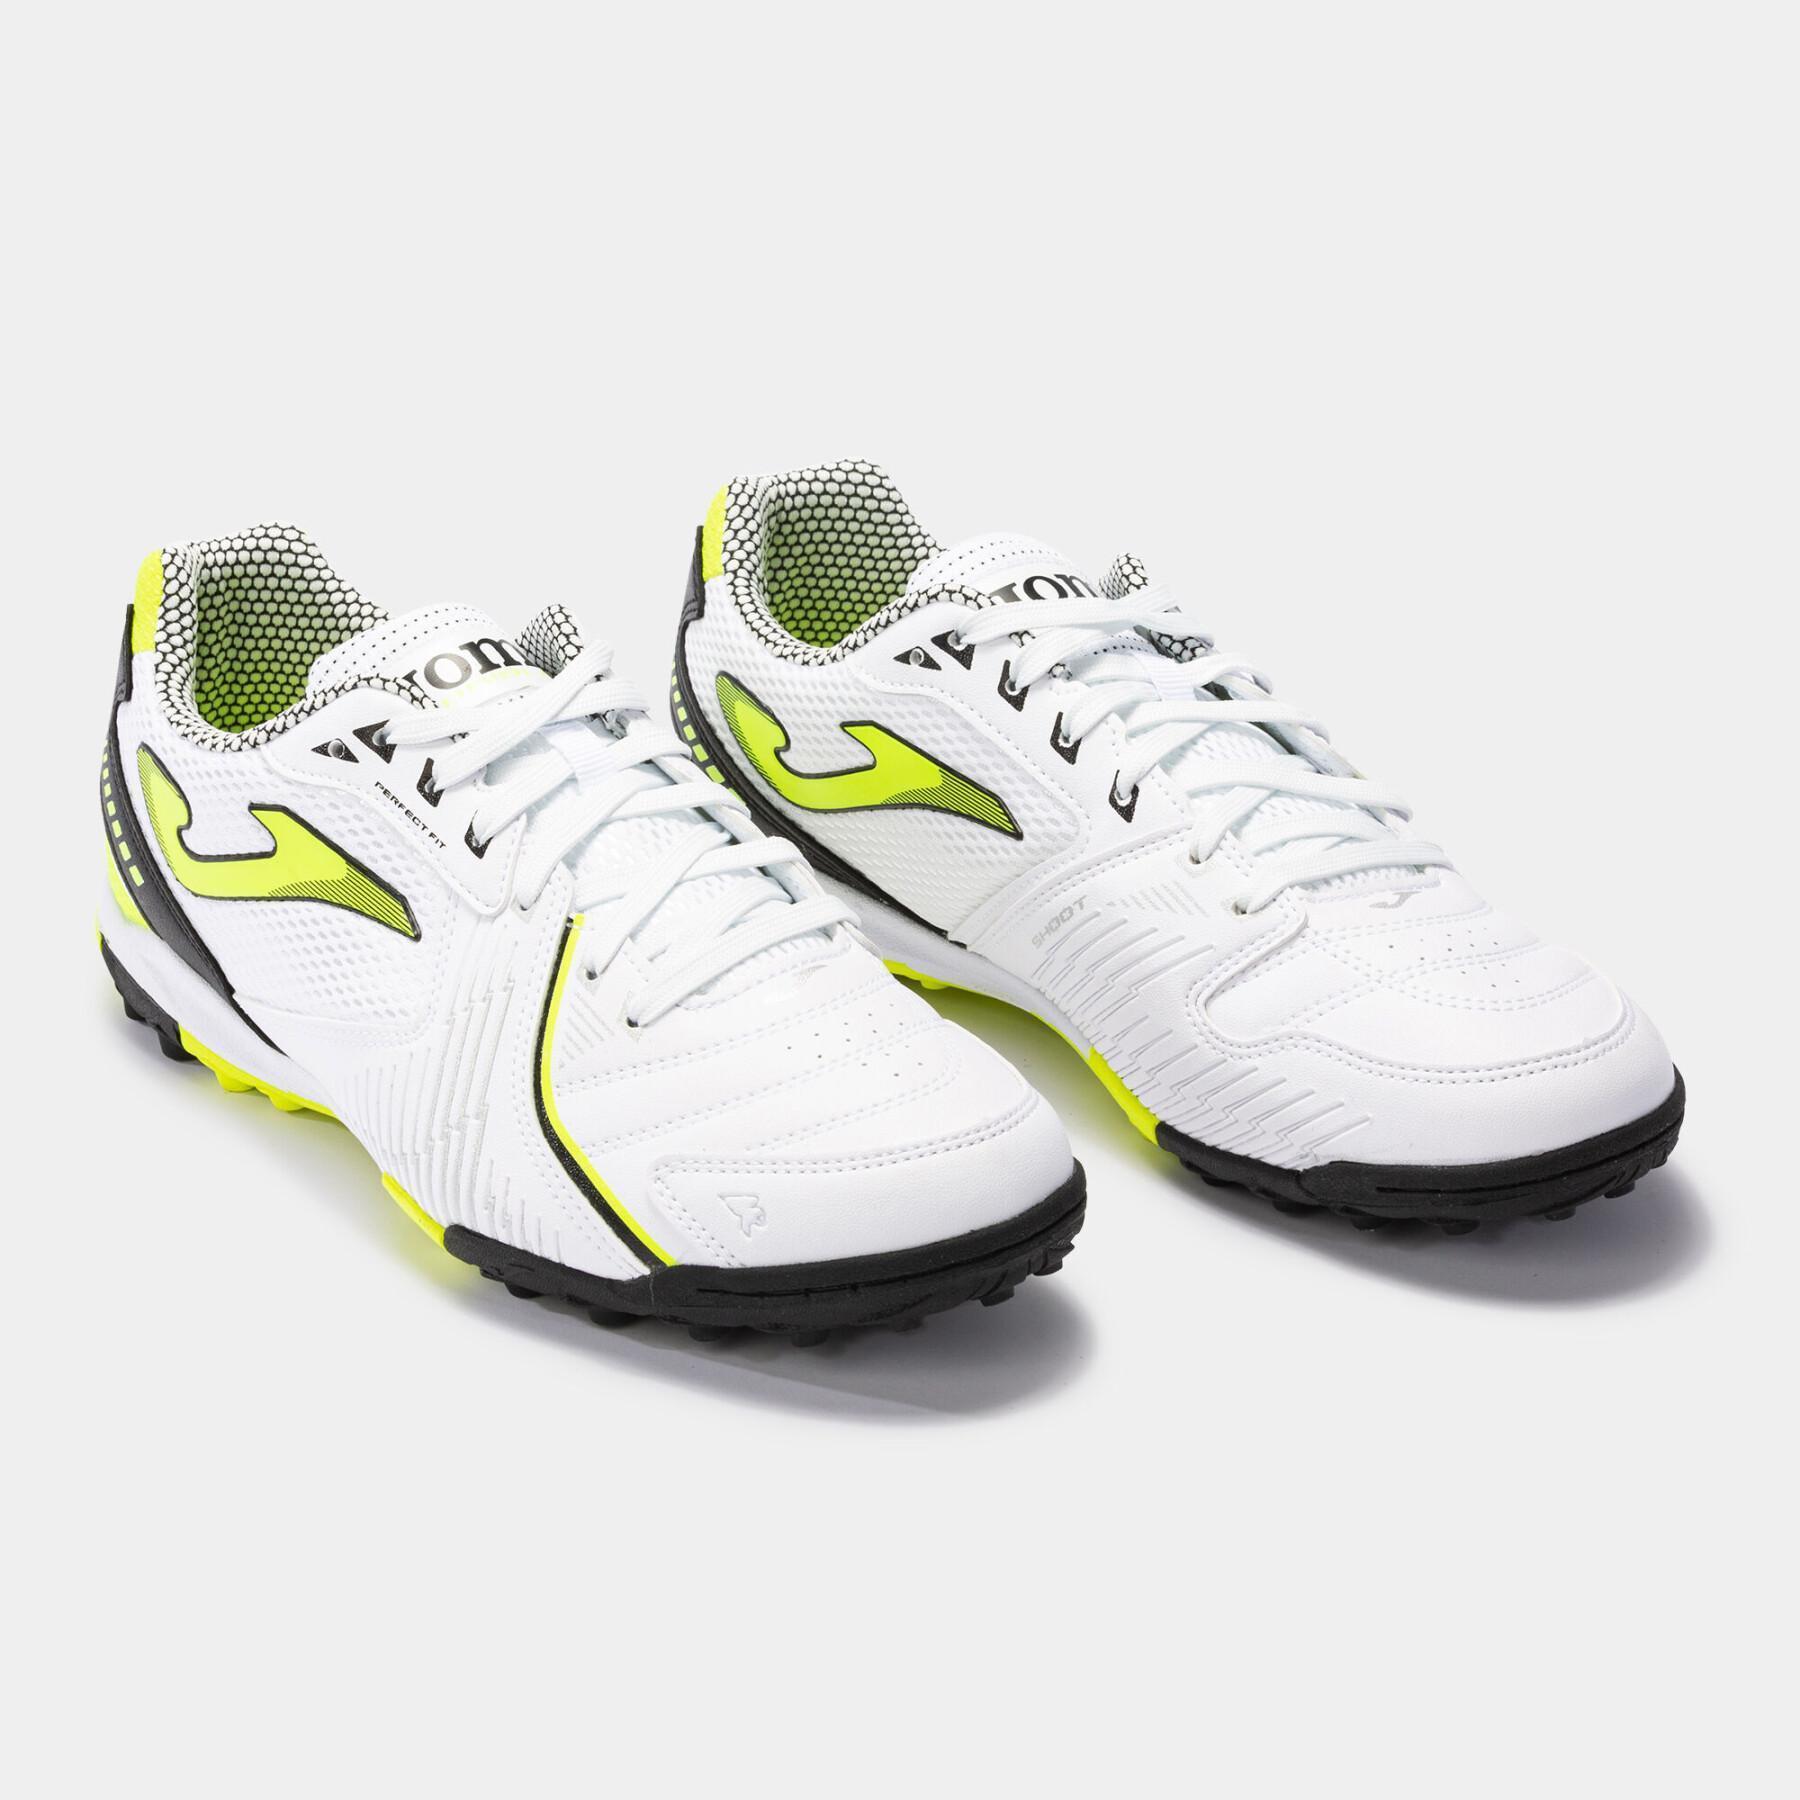 Chaussures de football terrain synthétique Joma Dribling 2202